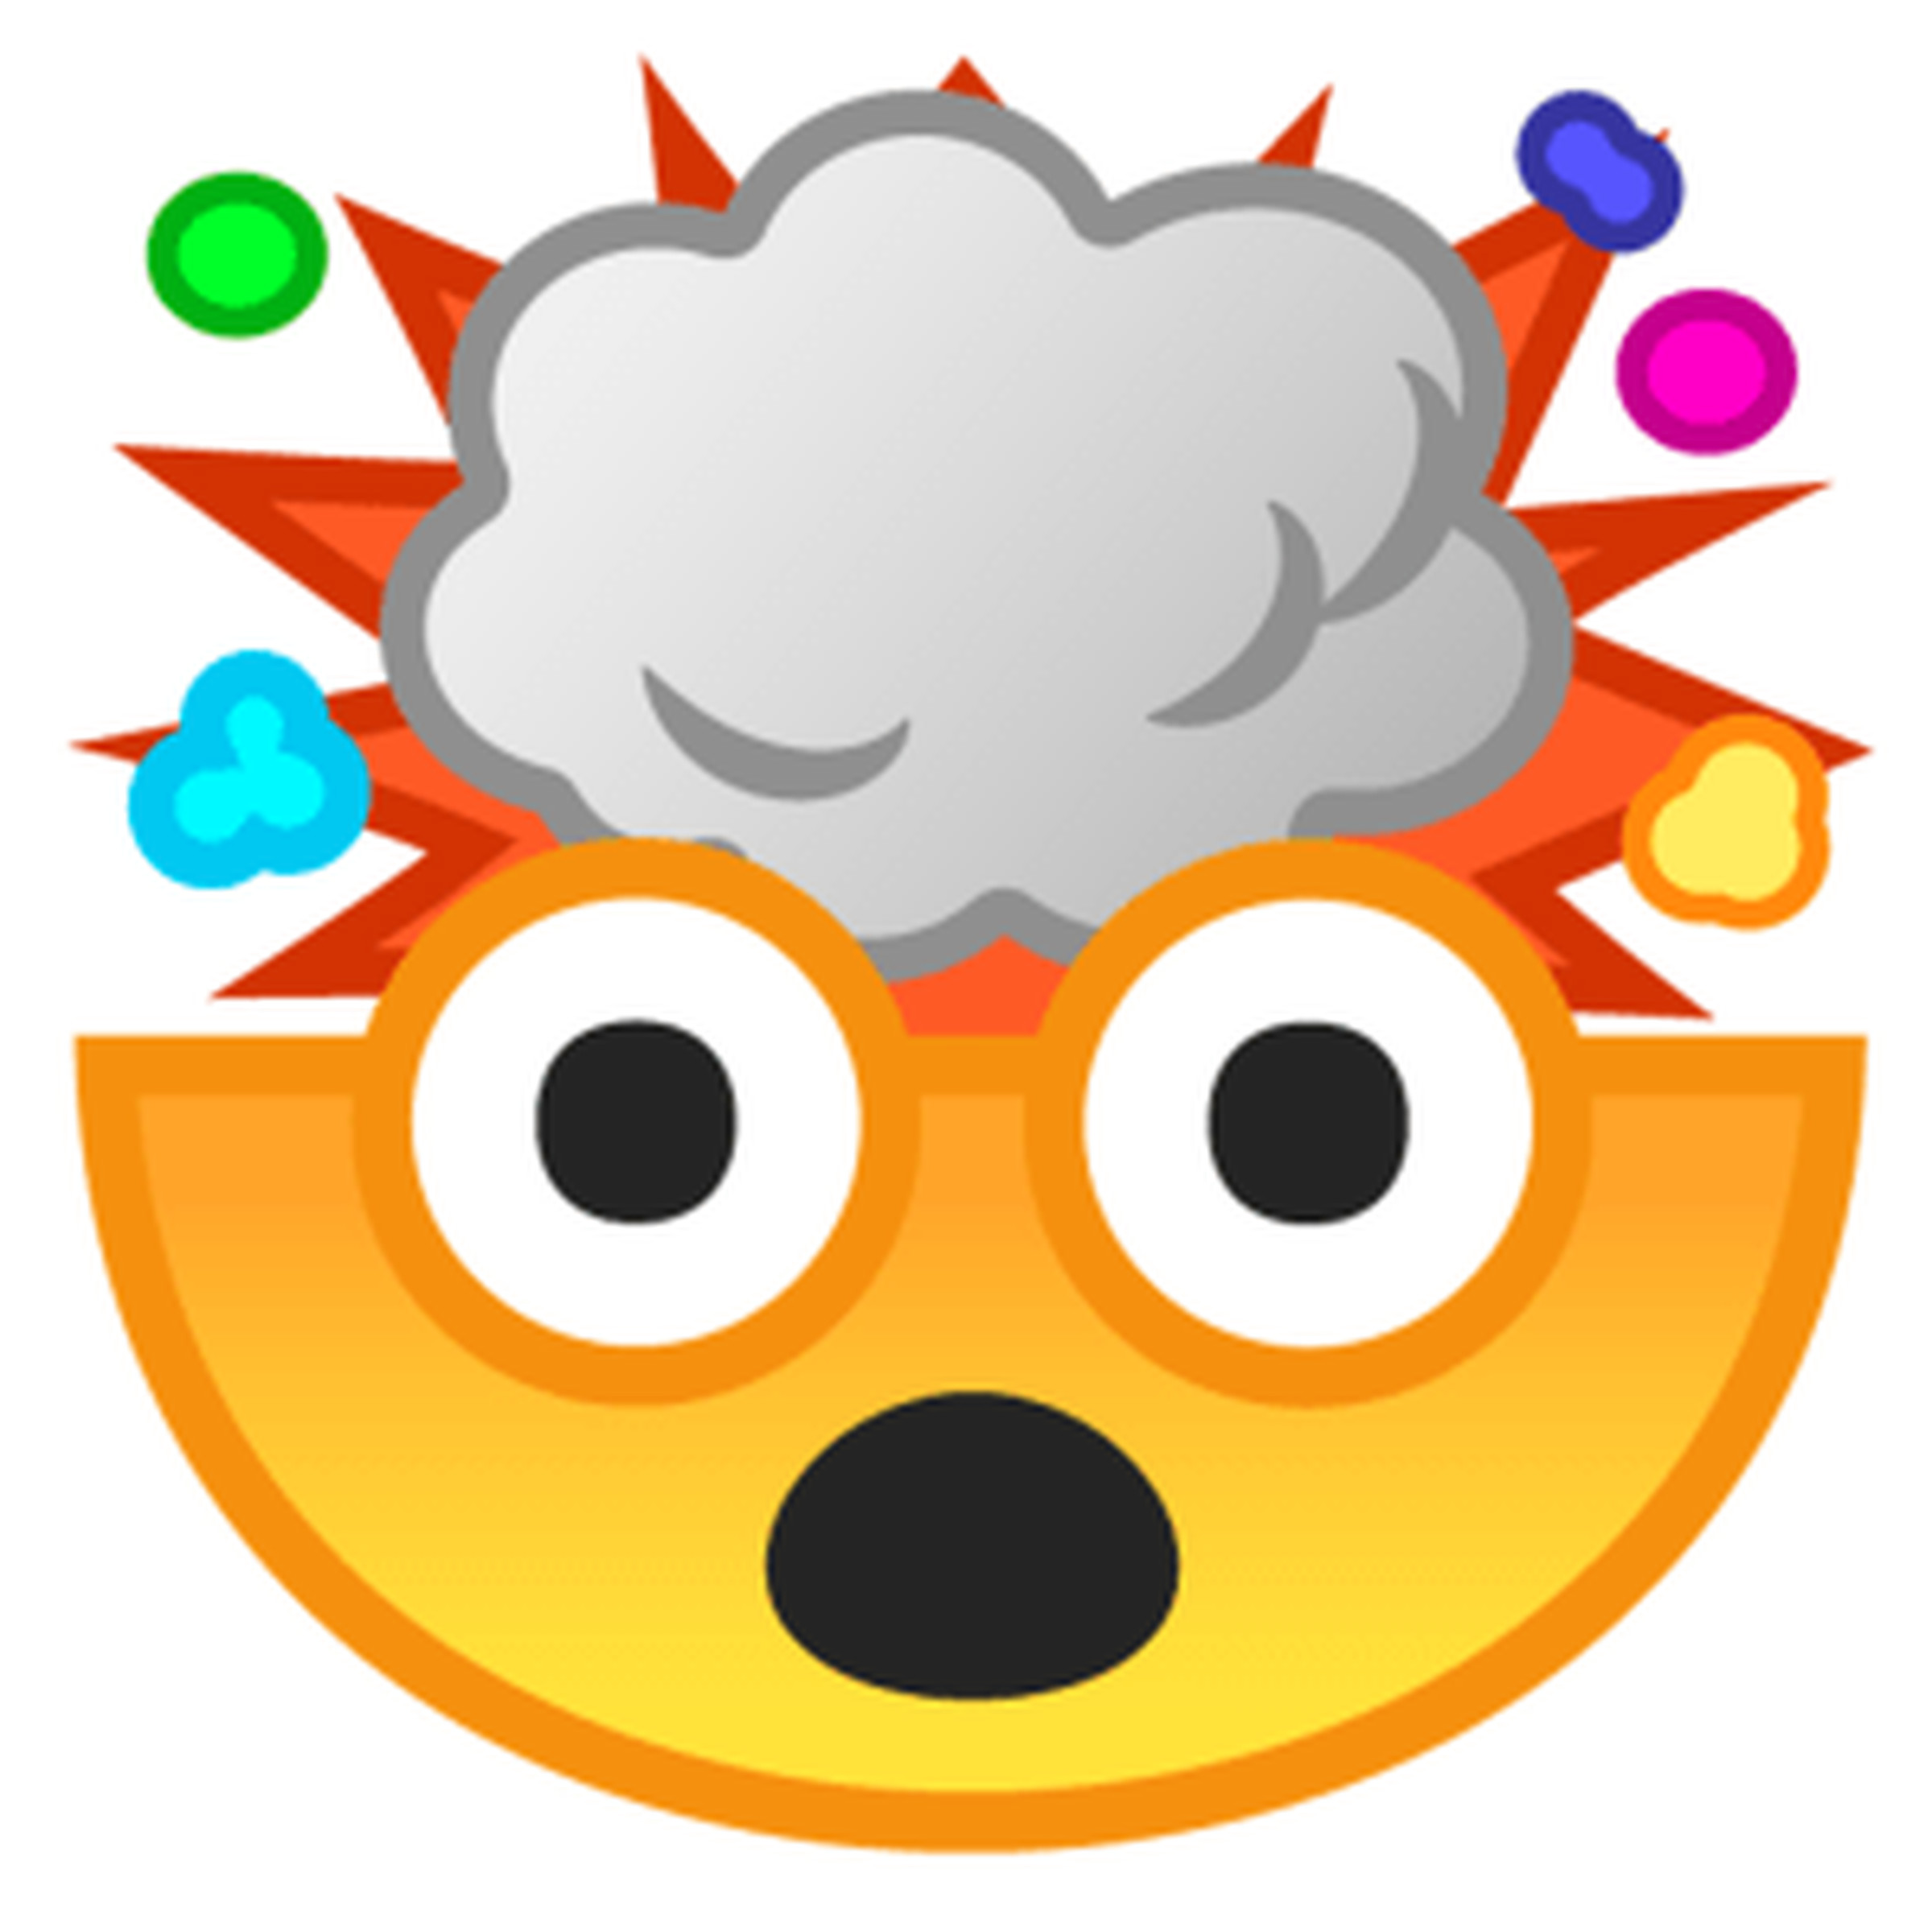 The new “mind blown” emoji reflects my excitement over these changes.